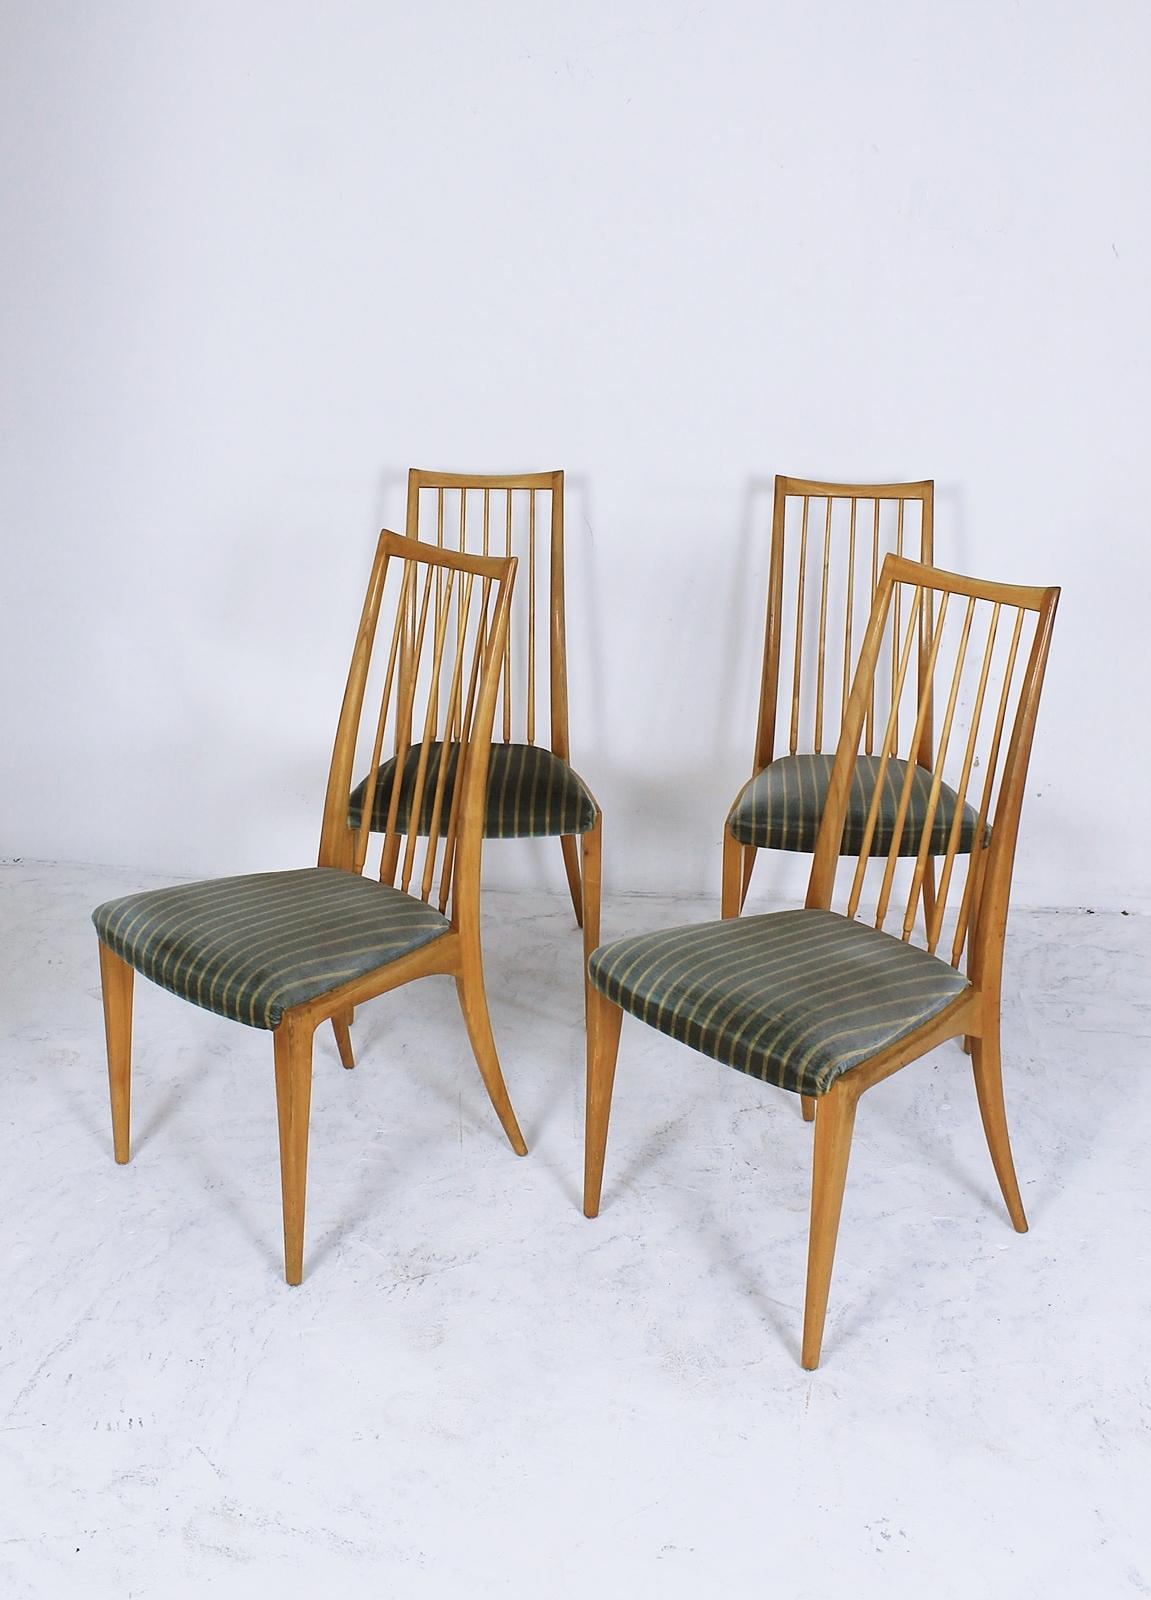 Filigree Chairs by Ernst Martin Dettinger for Lübke, Germany, 1960s For Sale 3